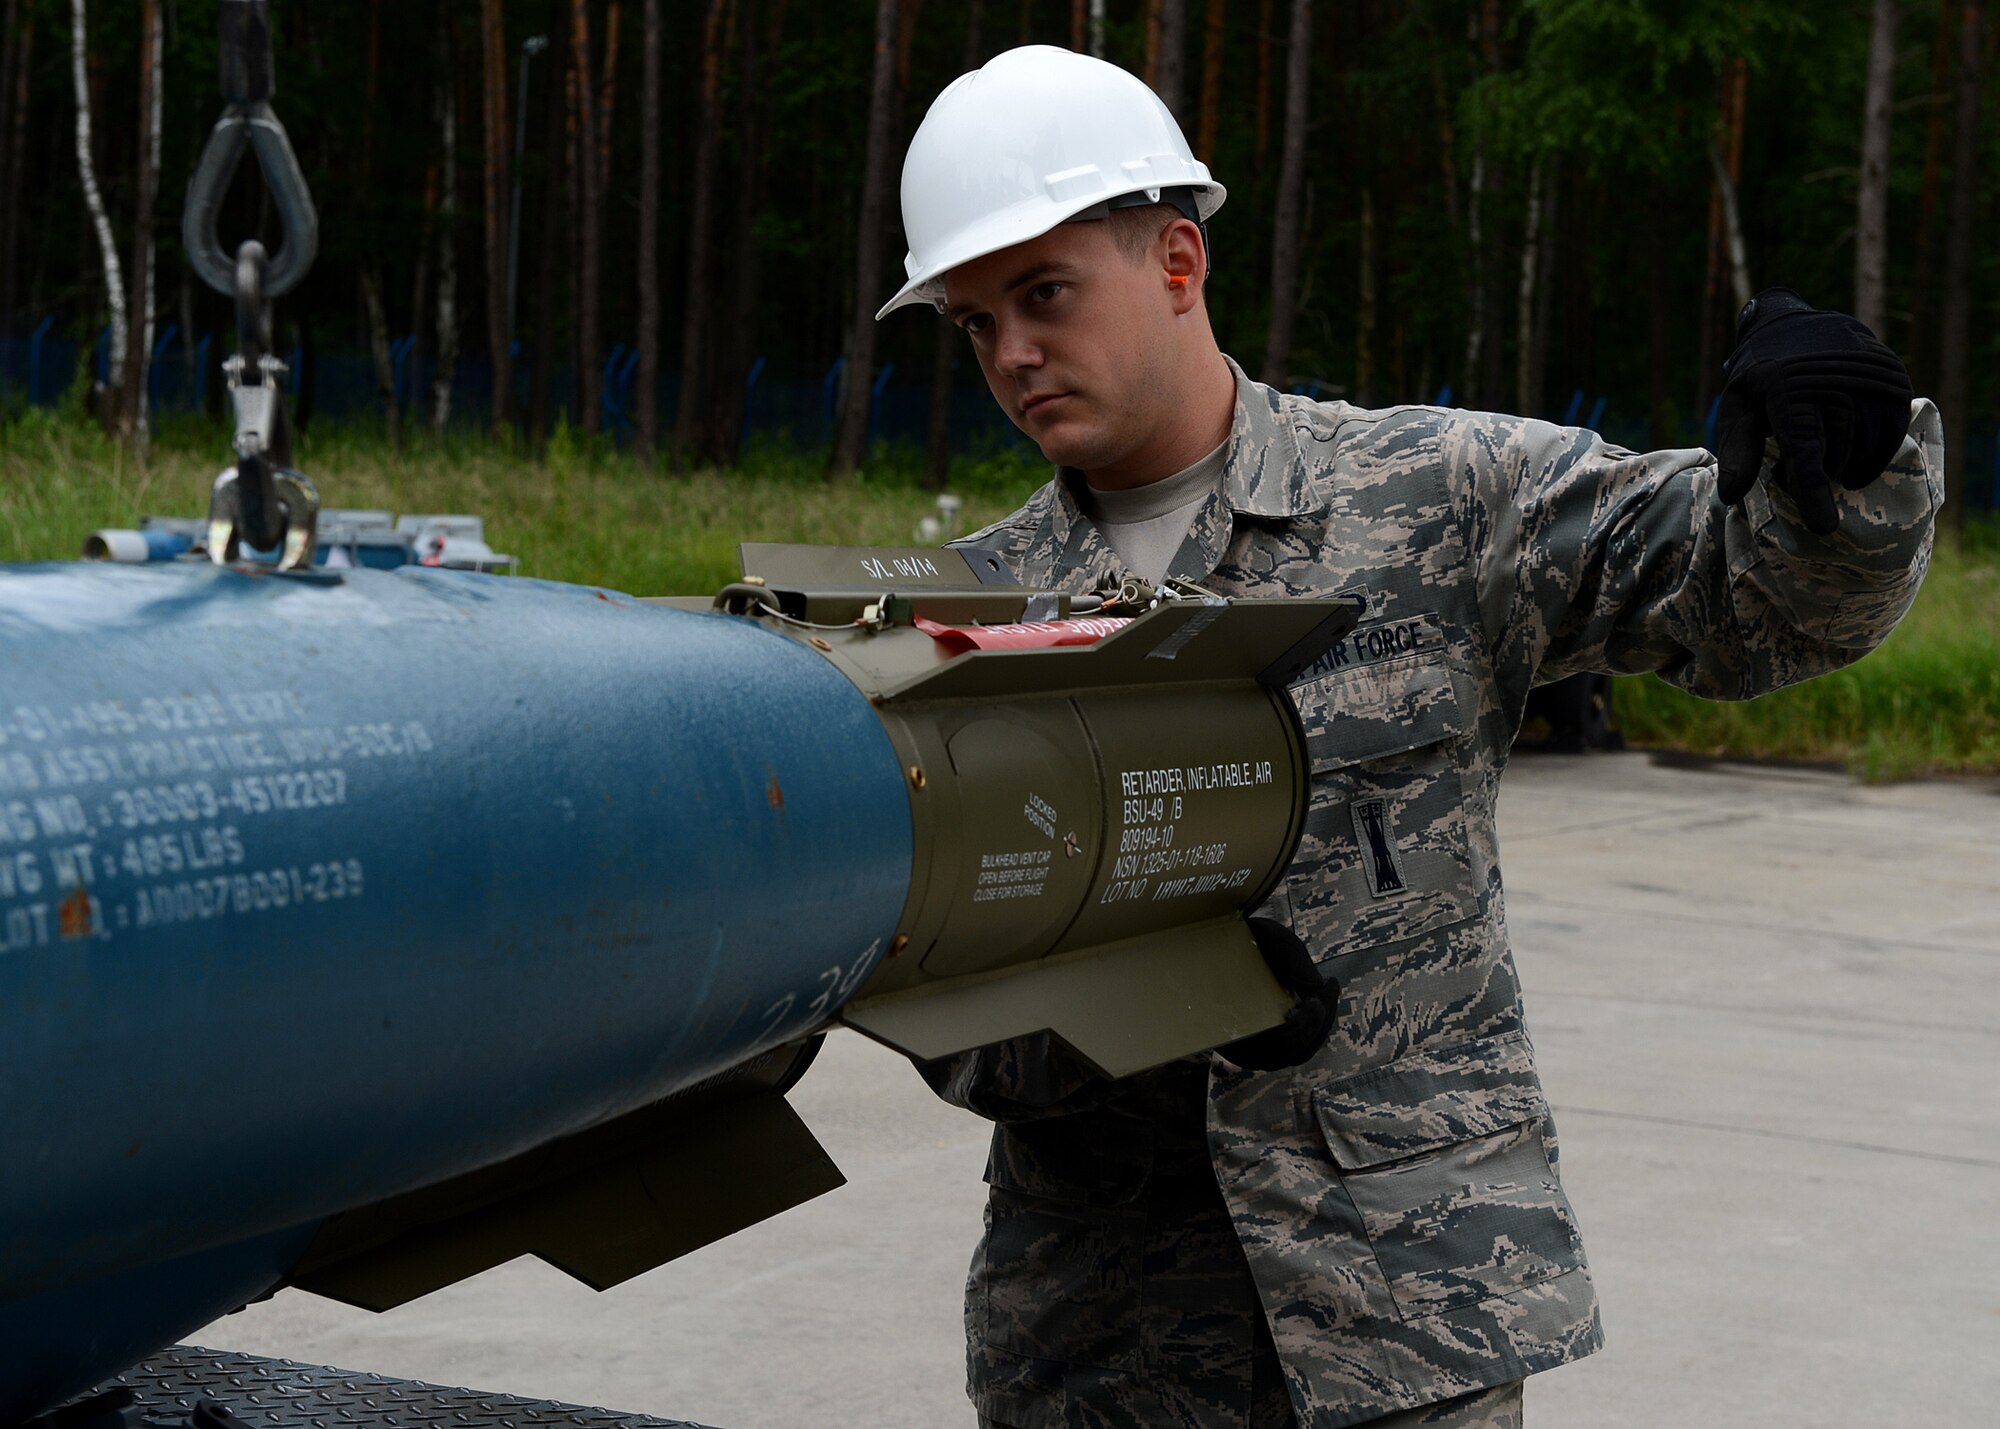 U.S. Air Force Senior Airman Timothy Greening, 52nd Equipment Maintenance Squadron precision guided munitions crew member from Norman, Okla., lowers a Bomb Drop Unit-50 onto a transport trailer at Lask Air Base, Poland, June 12, 2014. Airmen from the 52nd EMS of Spangdahlem Air Base, Germany, provided training ammunition to pilots for close-air-support mission training. In addition, their contributions also supported multinational exercises EAGLE TALON and BALTOPS 14, which aimed to increase interoperability and strengthen NATO partnerships. (U.S. Air Force photo by Airman 1st Class Kyle Gese/Released)